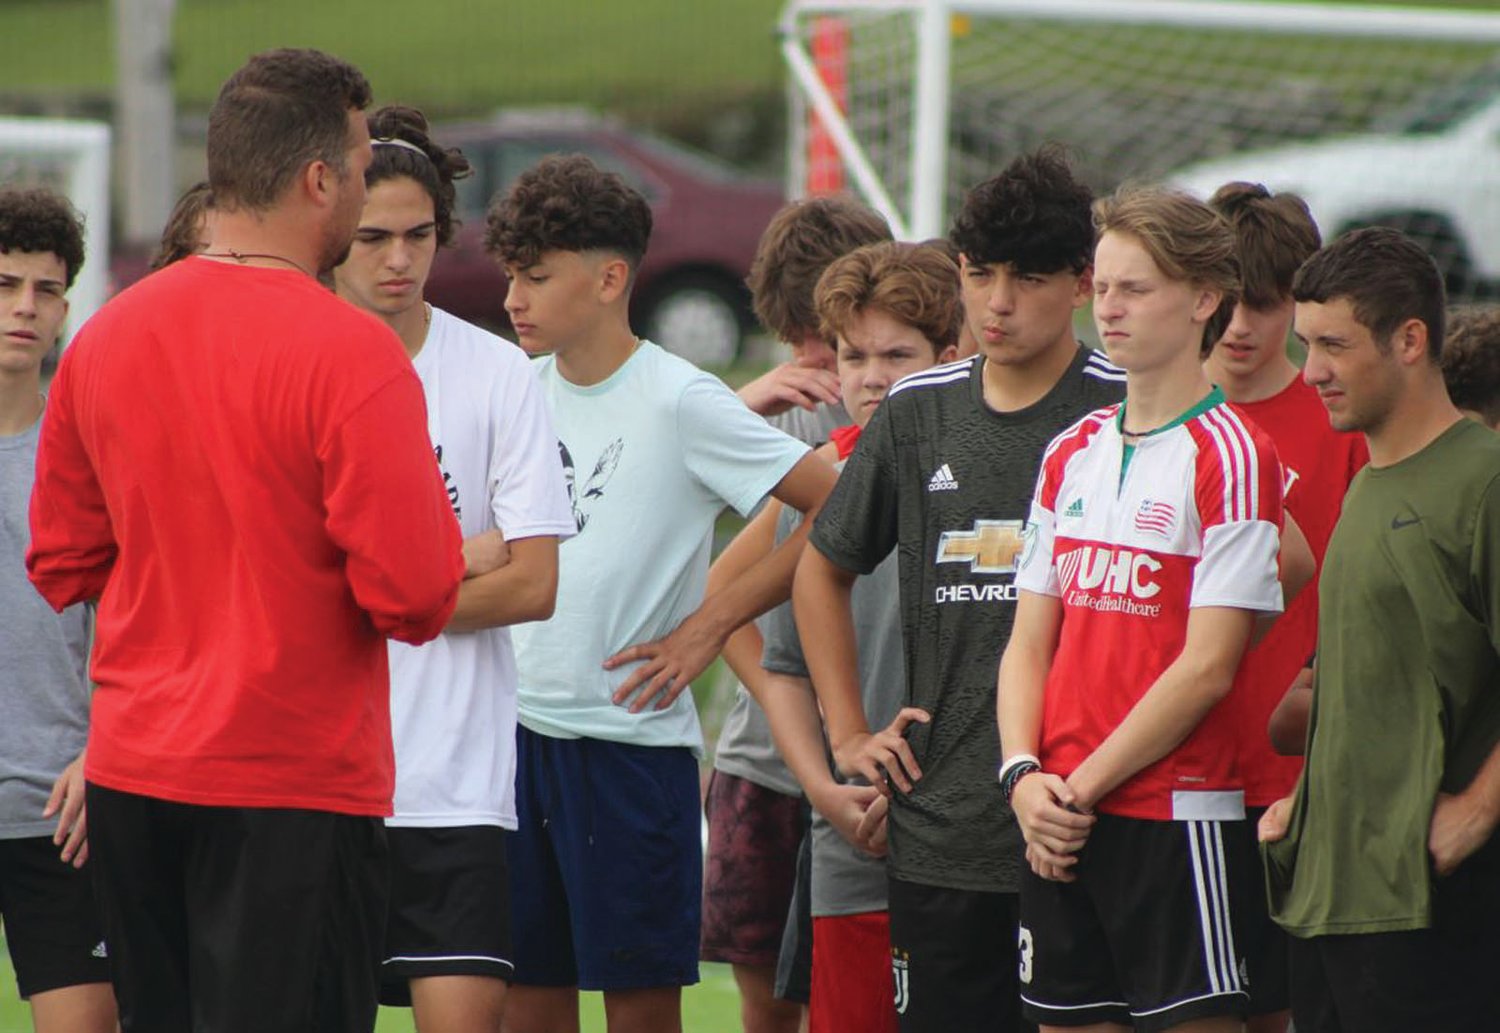 GETTING STARTED: The Cranston West boys soccer team gathers prior to a recent practice to talk strategy. The Falcons are coming off a first-place season in which they made the playoffs, and are looking to take the next step toward a title with their experienced core.